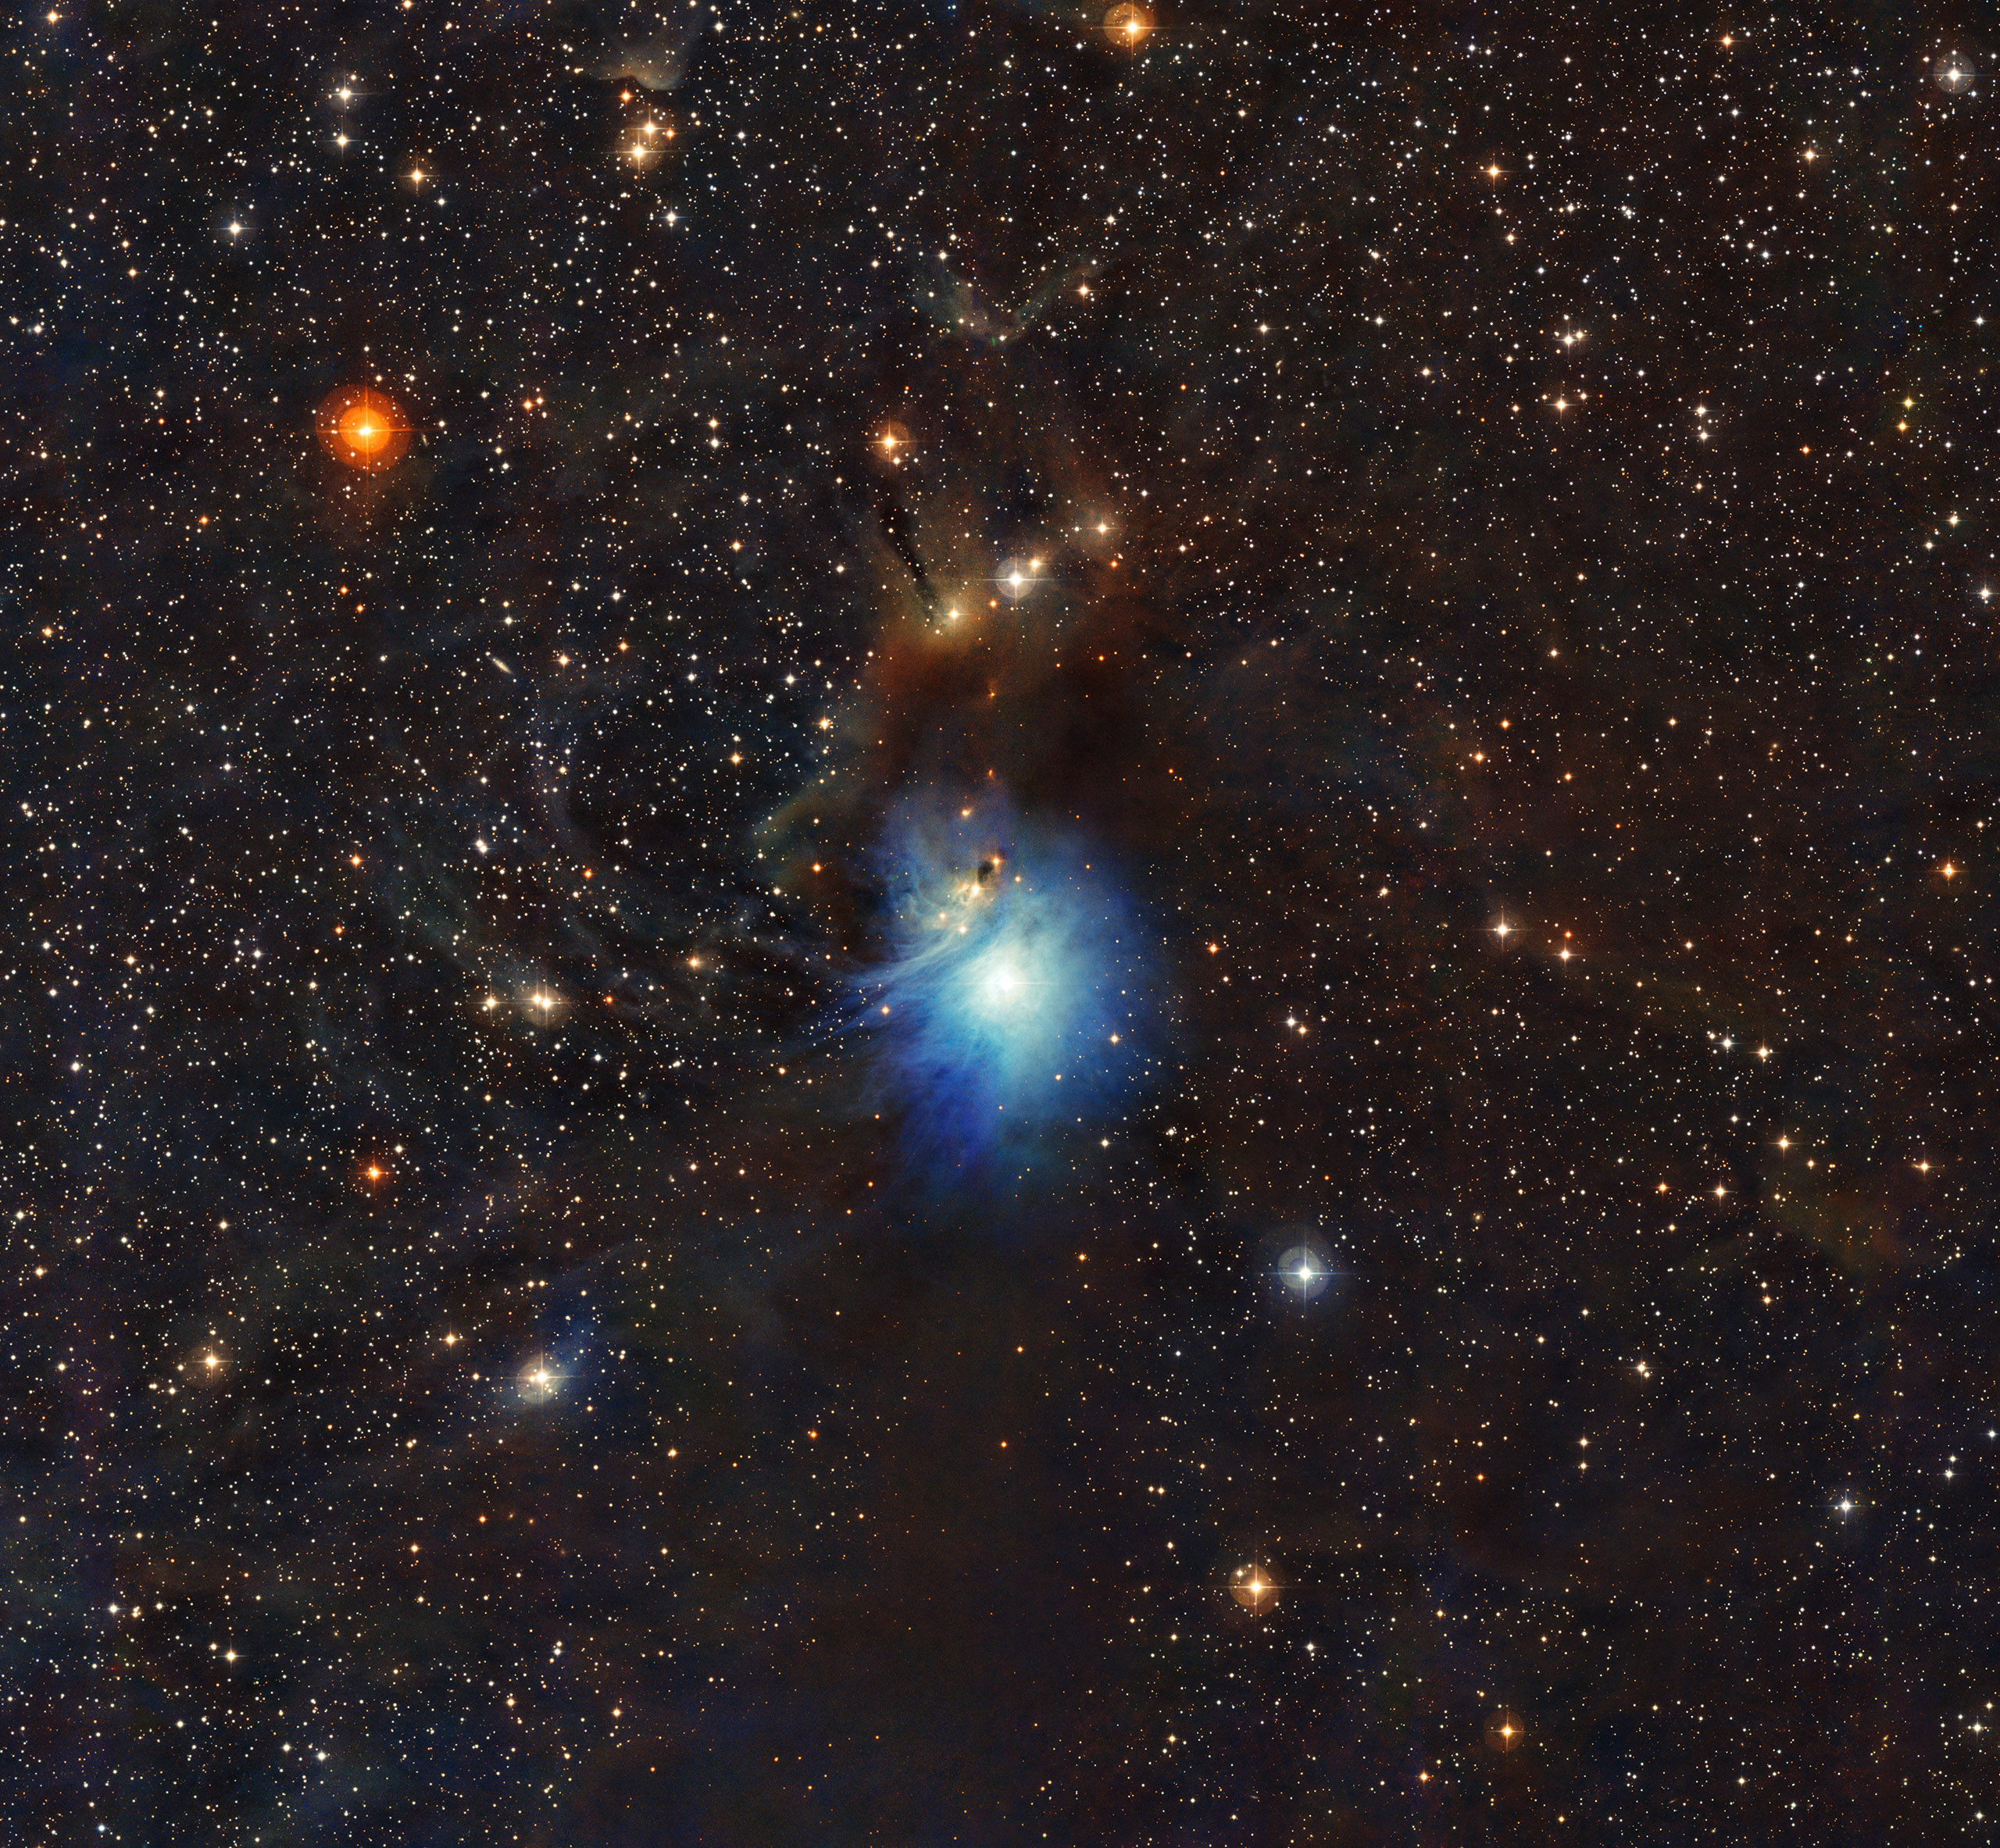 A newly formed star lights up the surrounding cosmic clouds in this image from ESO’s La Silla Observatory in Chile. Dust particles in the vast clouds that surround the star HD 97300 diffuse its light, like a car headlight in enveloping fog, and create the reflection nebula IC 2631. Feb. 10, 2016.